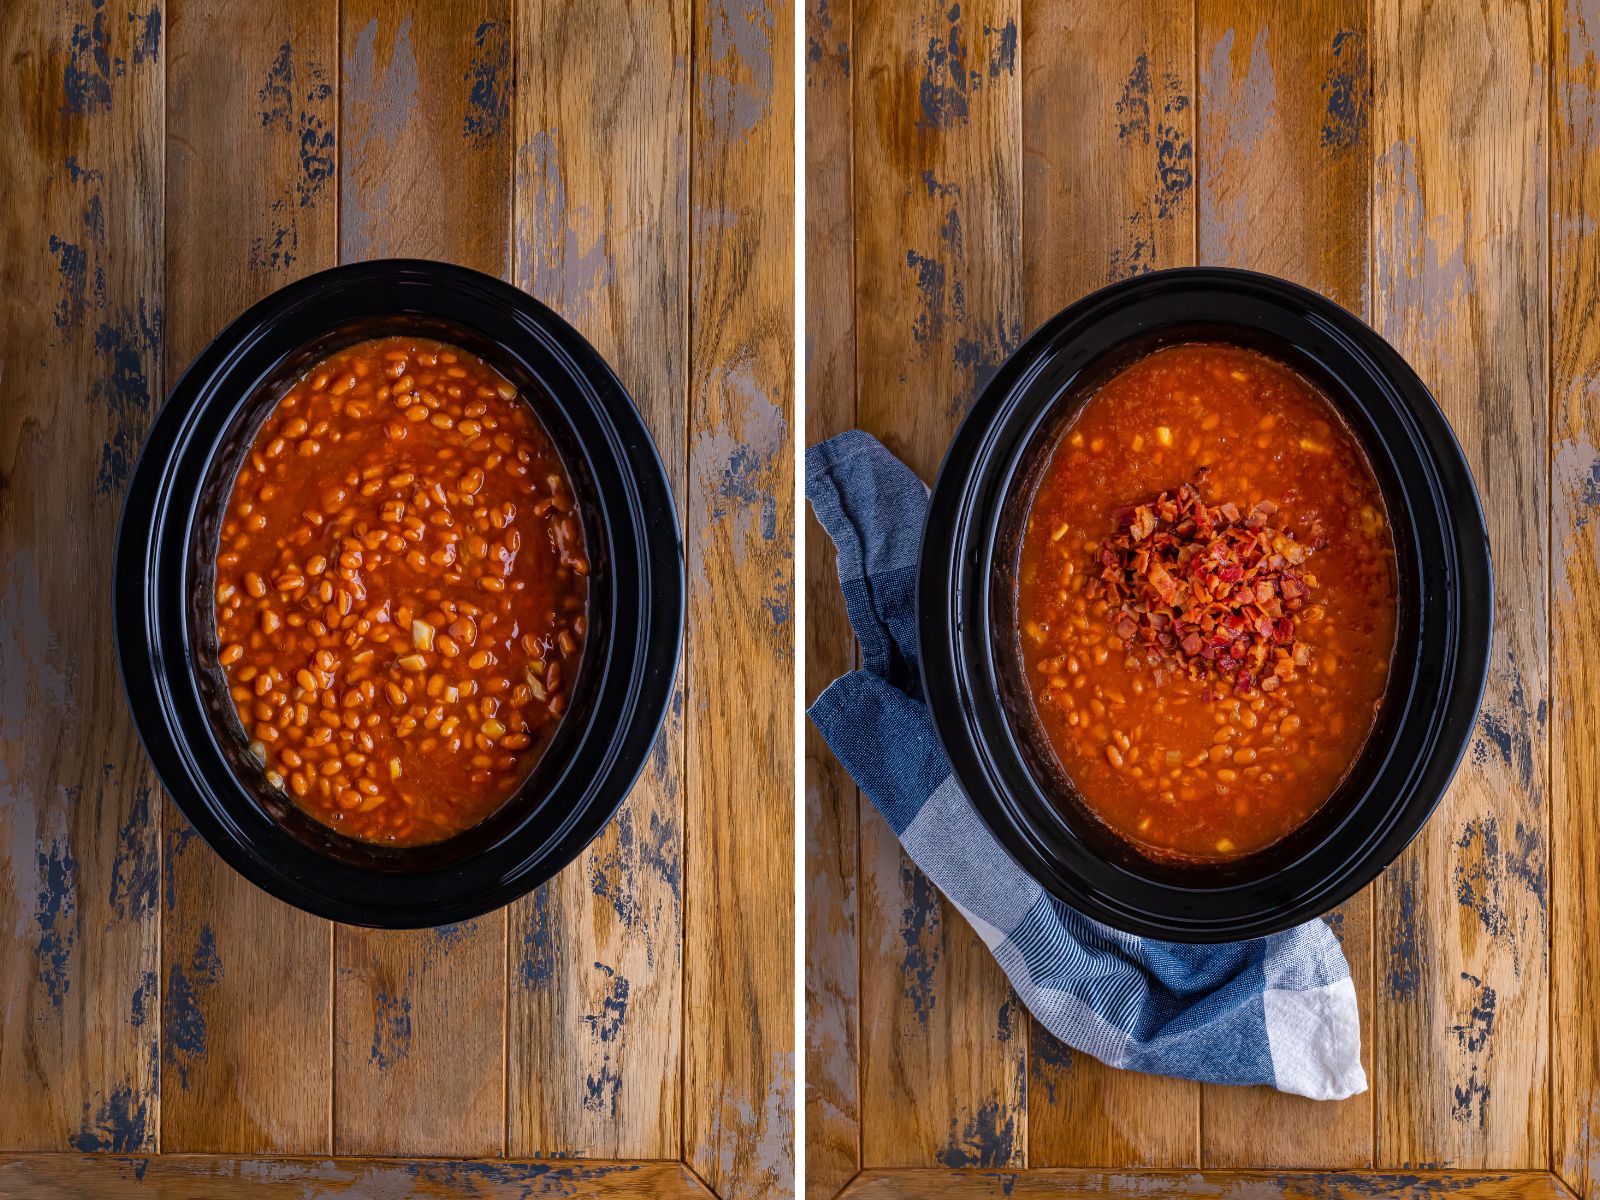 Cooked baked beans in a slow cooker and bacon being added to baked beans in a slow cooker.